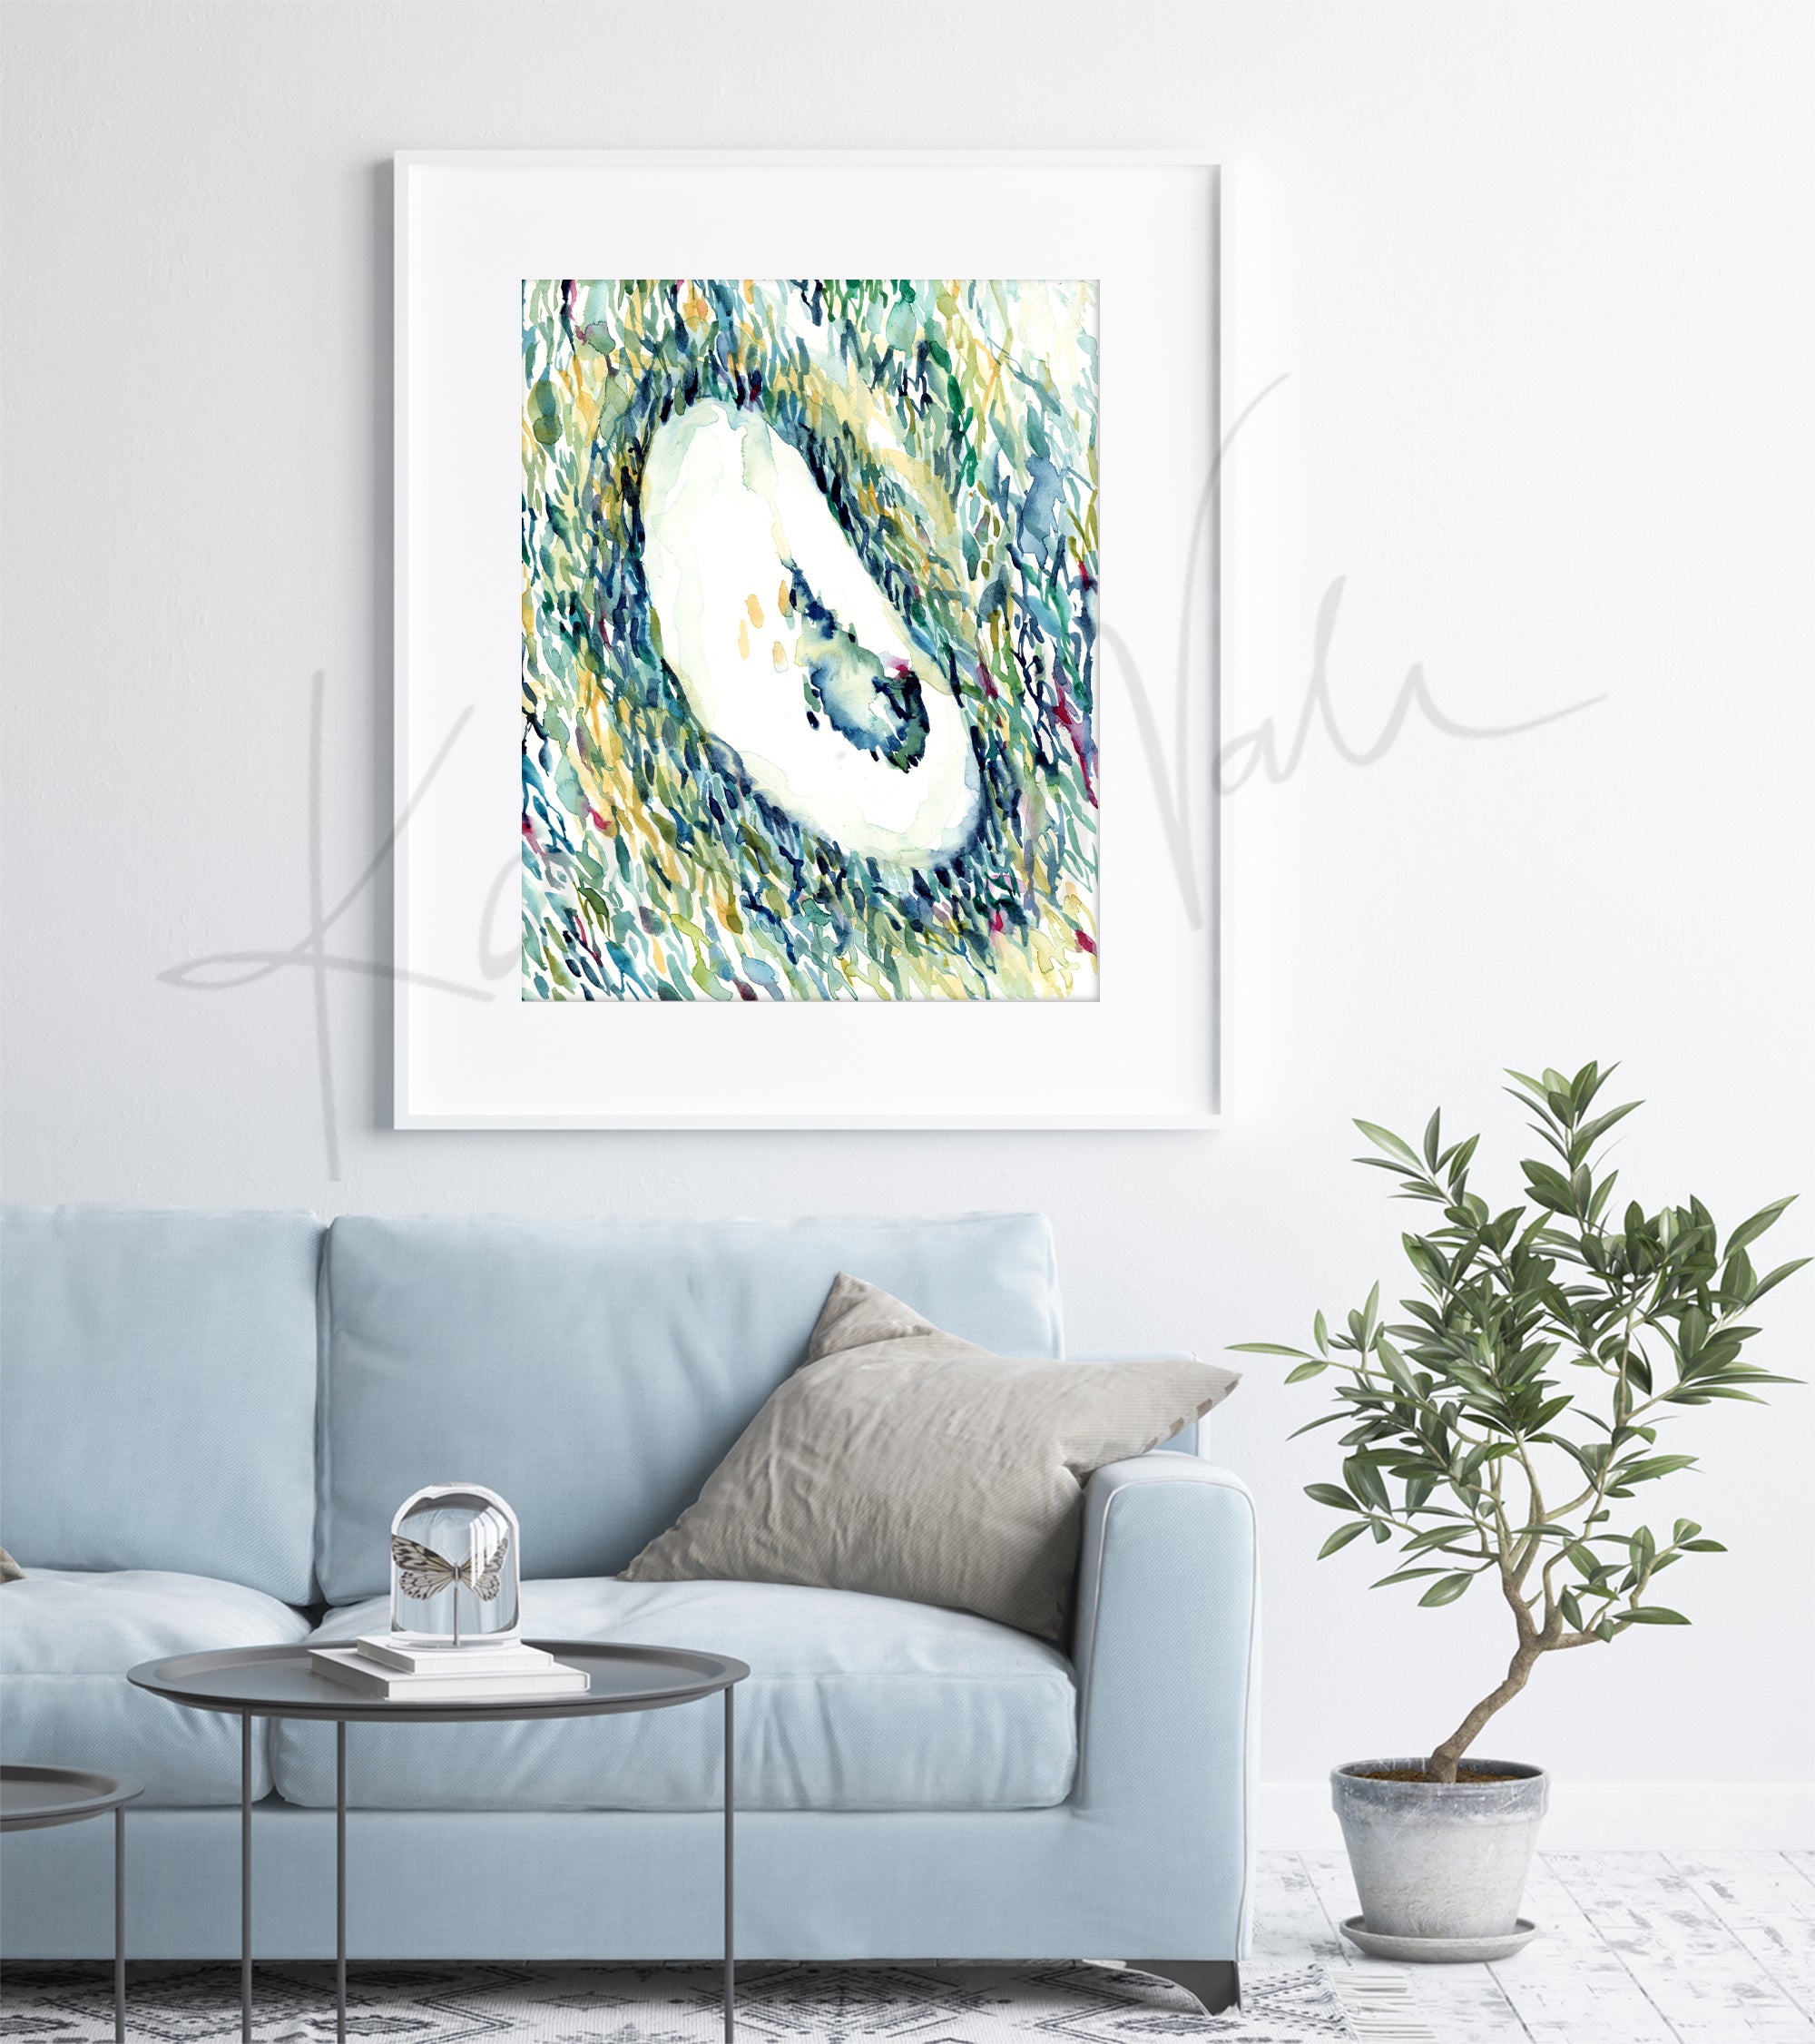 Framed watercolor painting of an IVF ultrasound. The painting is hanging over a blue couch.